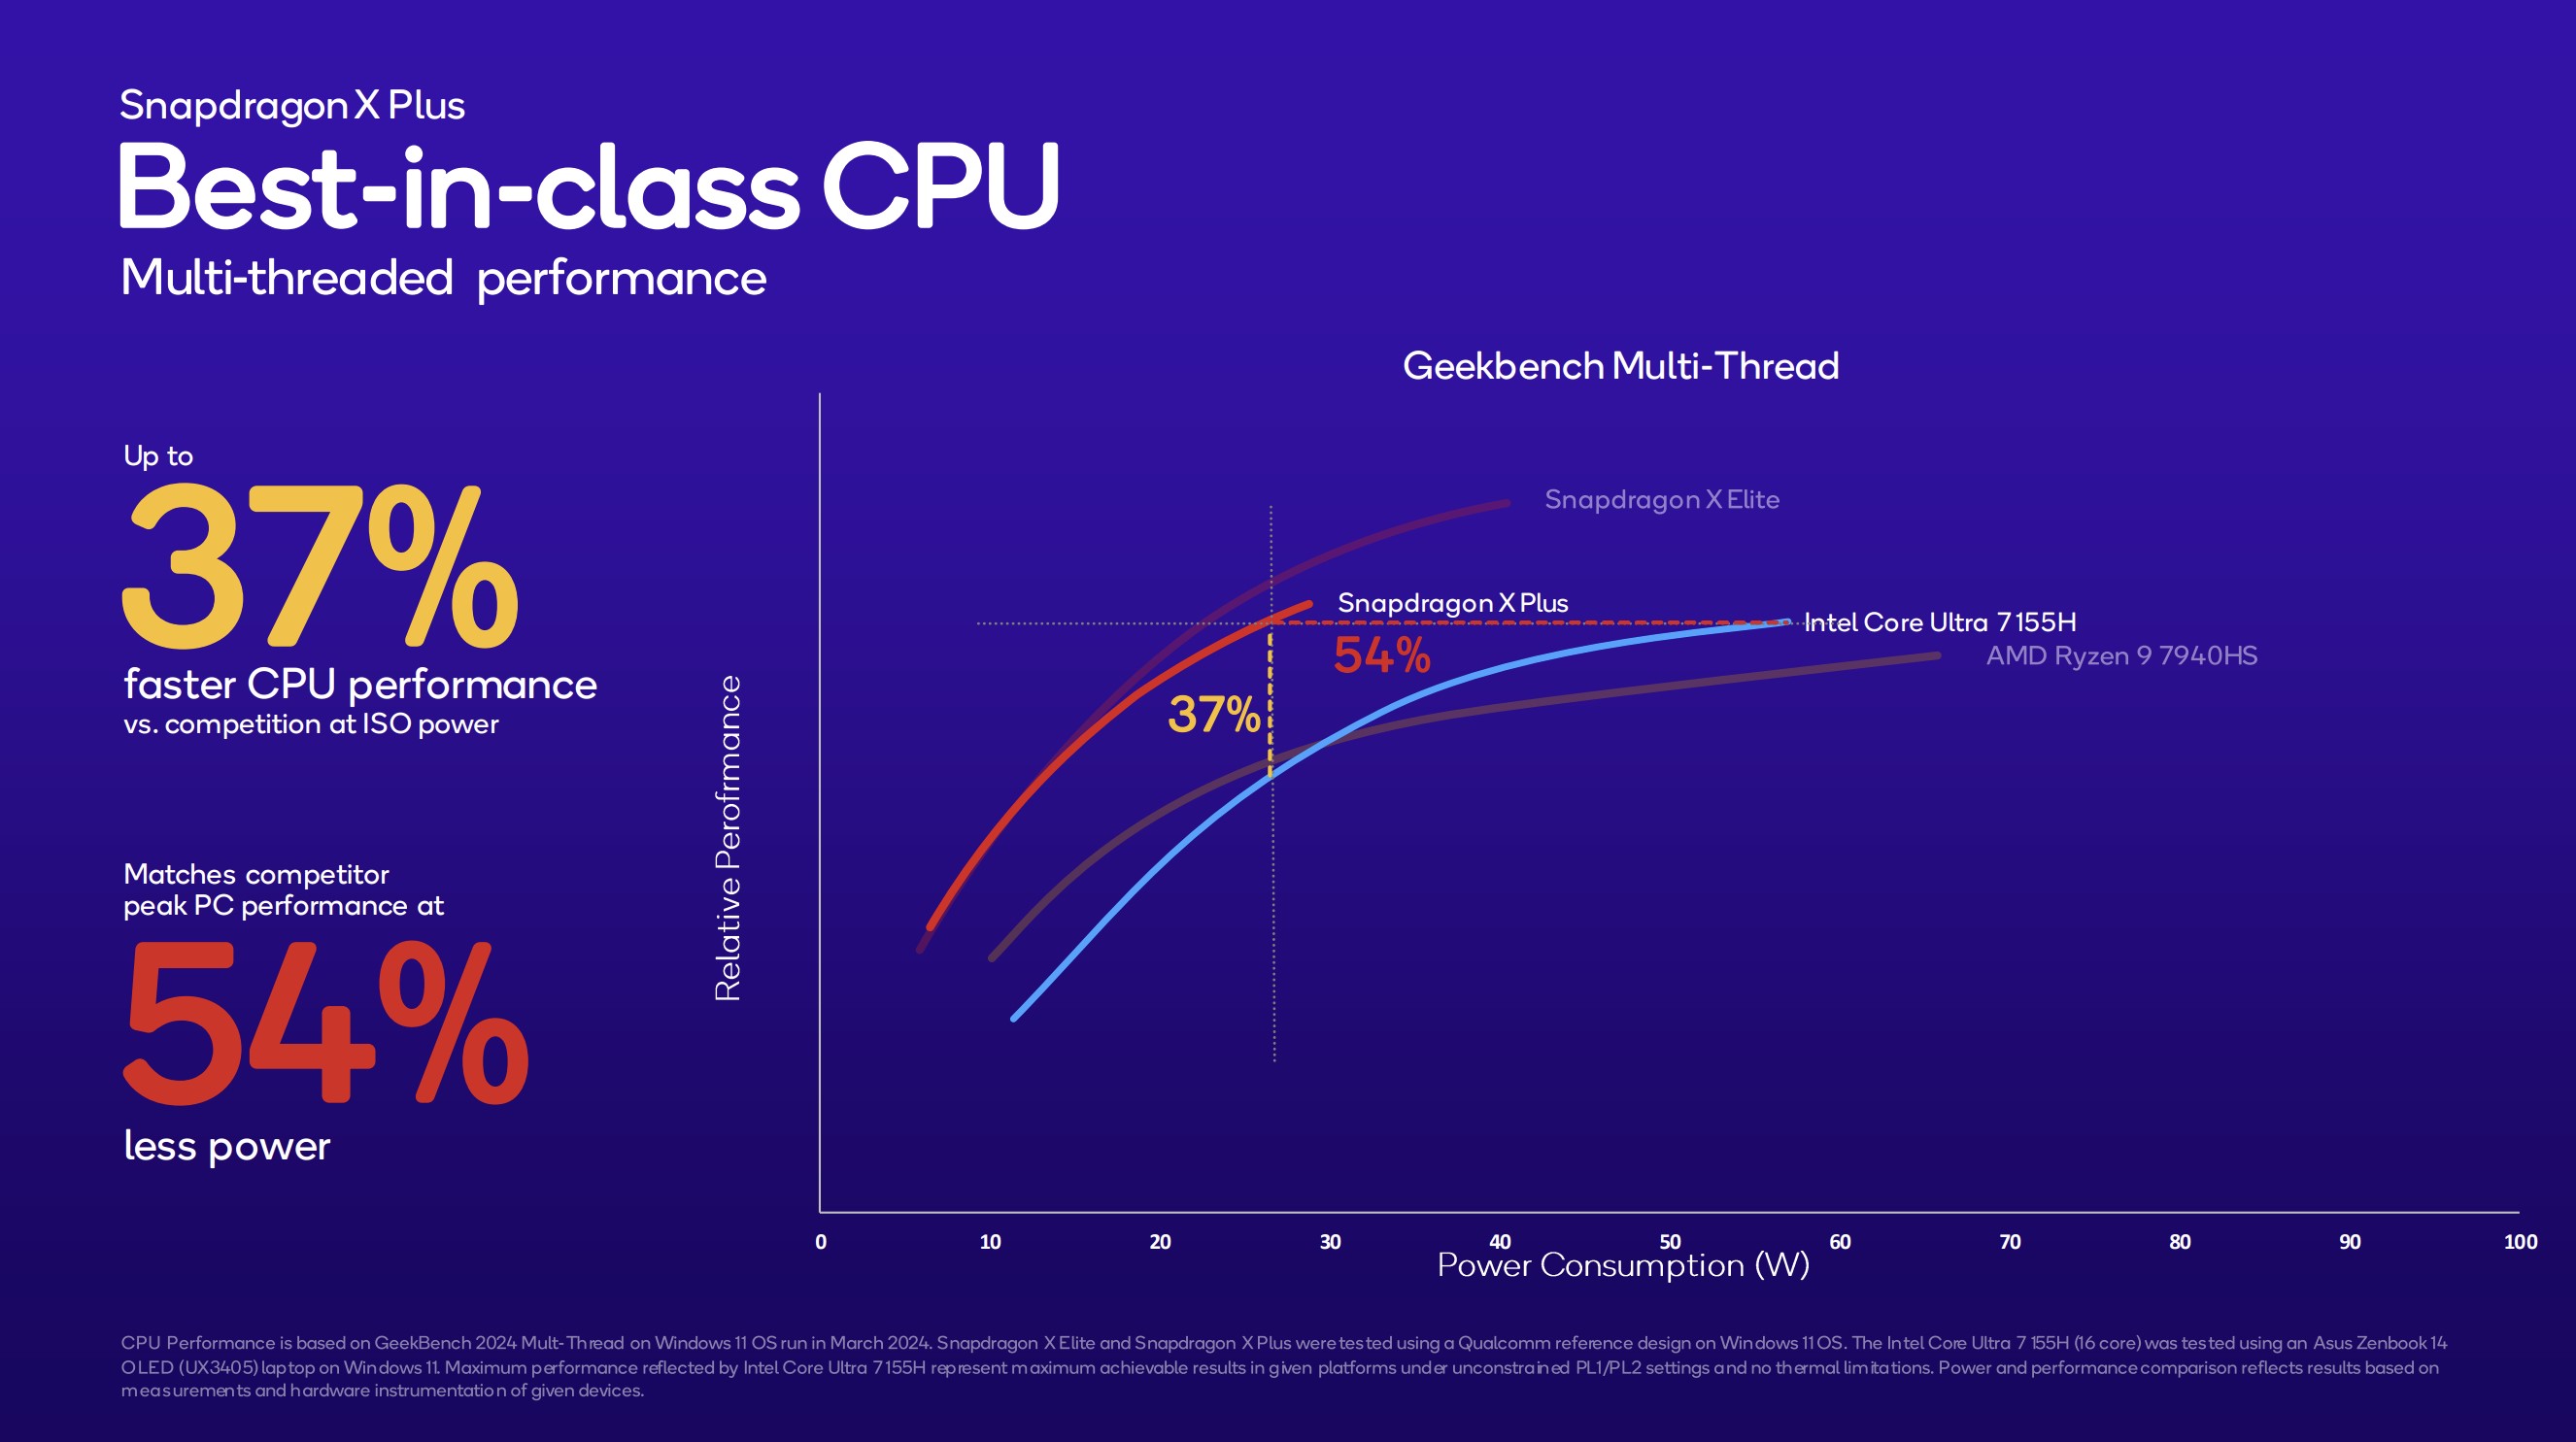 Benchmarks from the new Snapdragon X Plus CPU